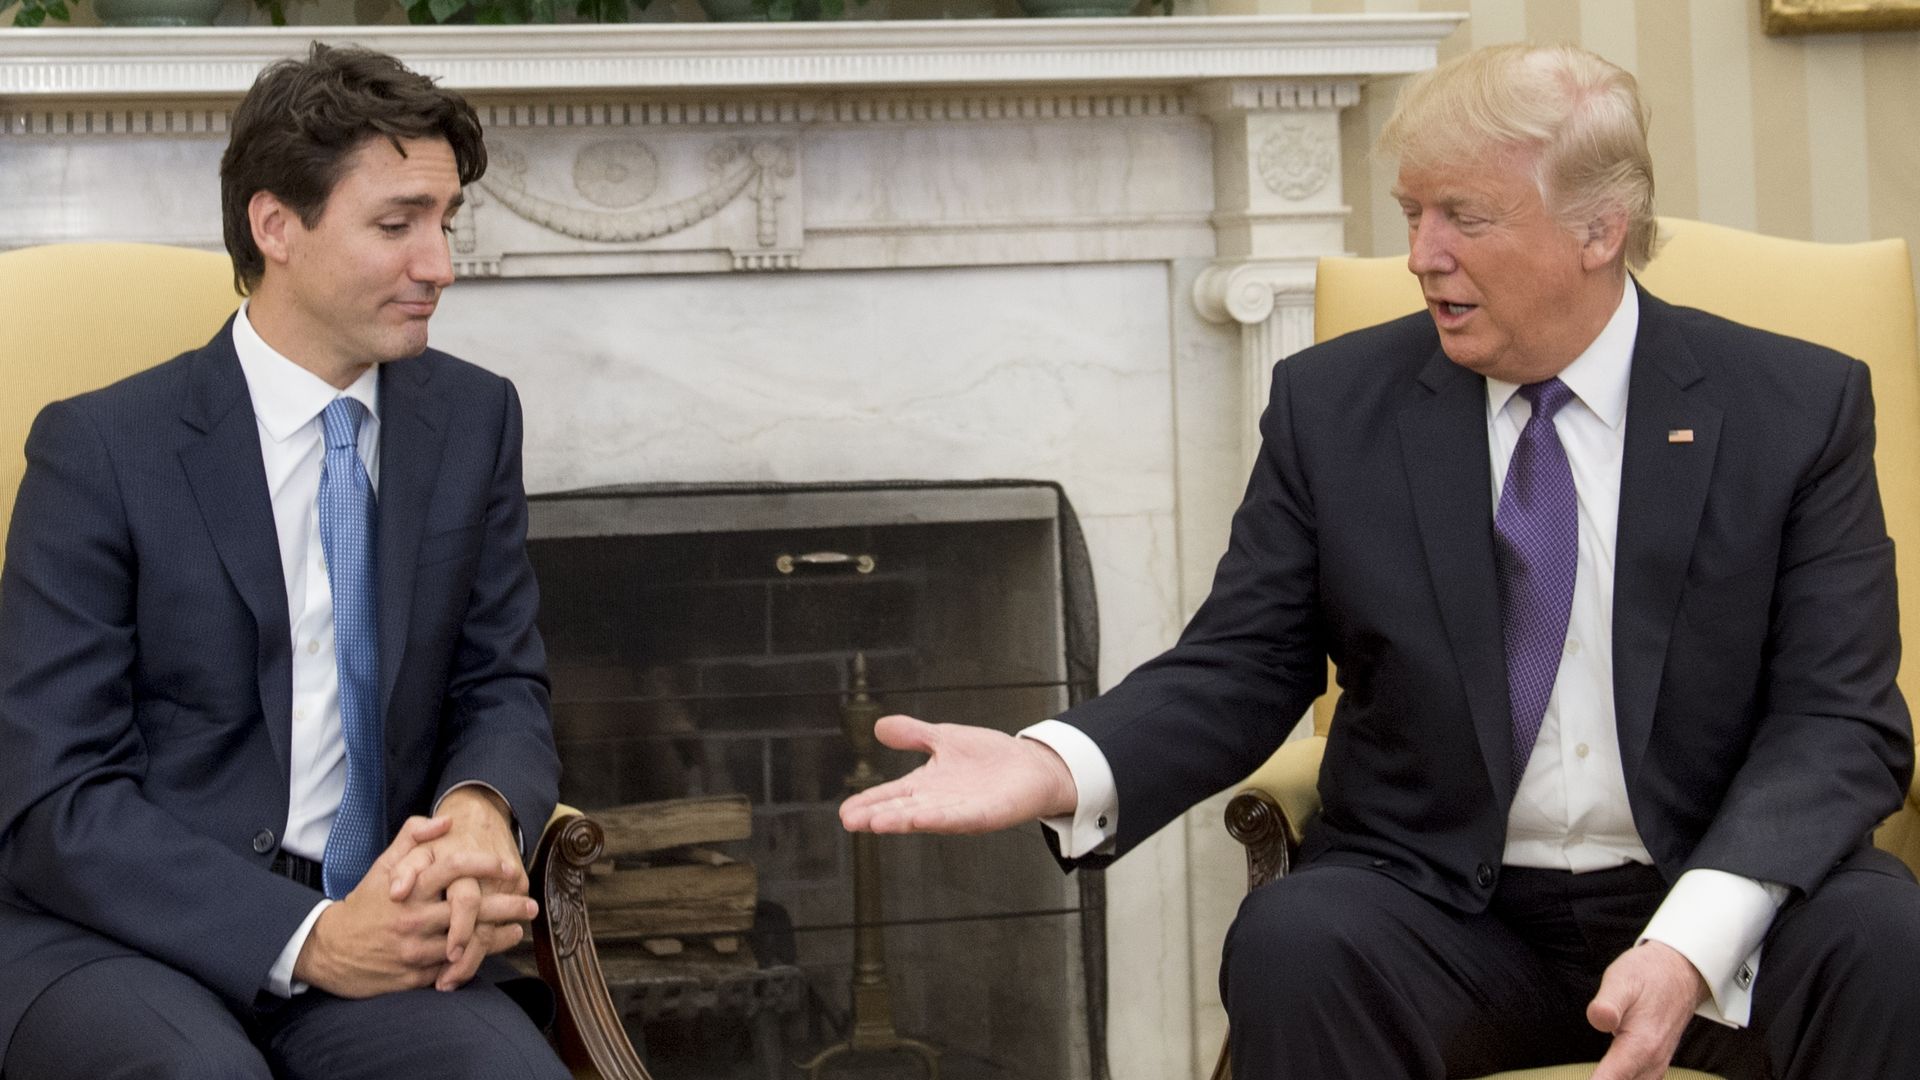 US President Donald Trump and Canadian Prime Minister Justin Trudeau shake hands during a meeting in the Oval Office 